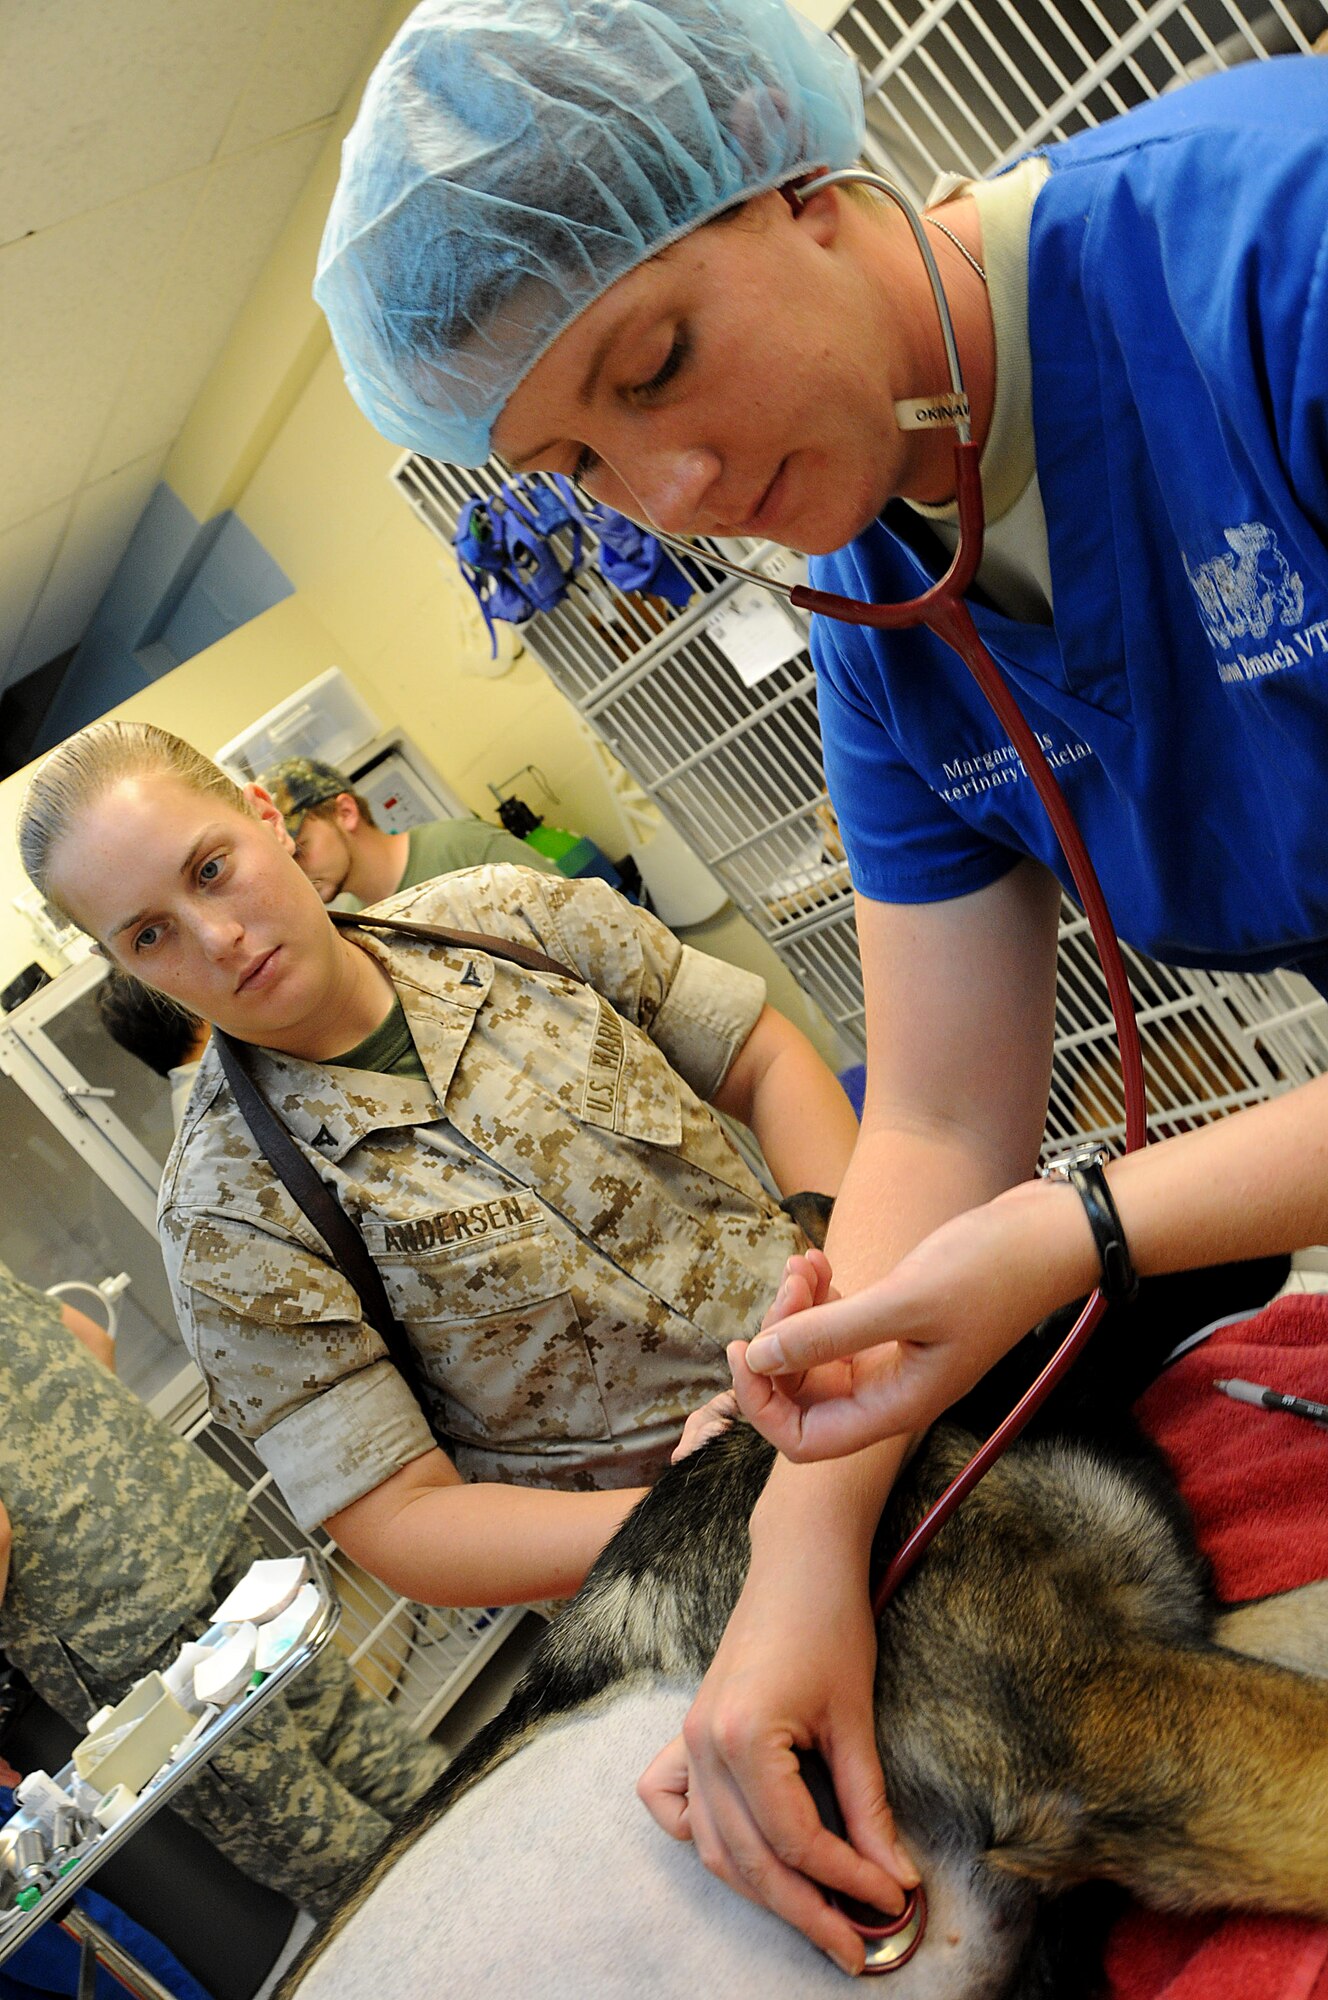 Margaret Wells, animal care specialist, checks the pulse of Nico, a military working dog while his hander, Marine Corps Lance Cpl. Alyssa Andersen, watches at the veterinary clinic, Kadena Air Base, Japan, Aug. 3, 2010. The pre-anesthetic given to Nico will put him asleep during the Gastropexy surgery making it vital to monitor Nico's pulse throughout the procedure. (U.S. Air Force photo/Staff Sgt. Darnell T. Cannady)